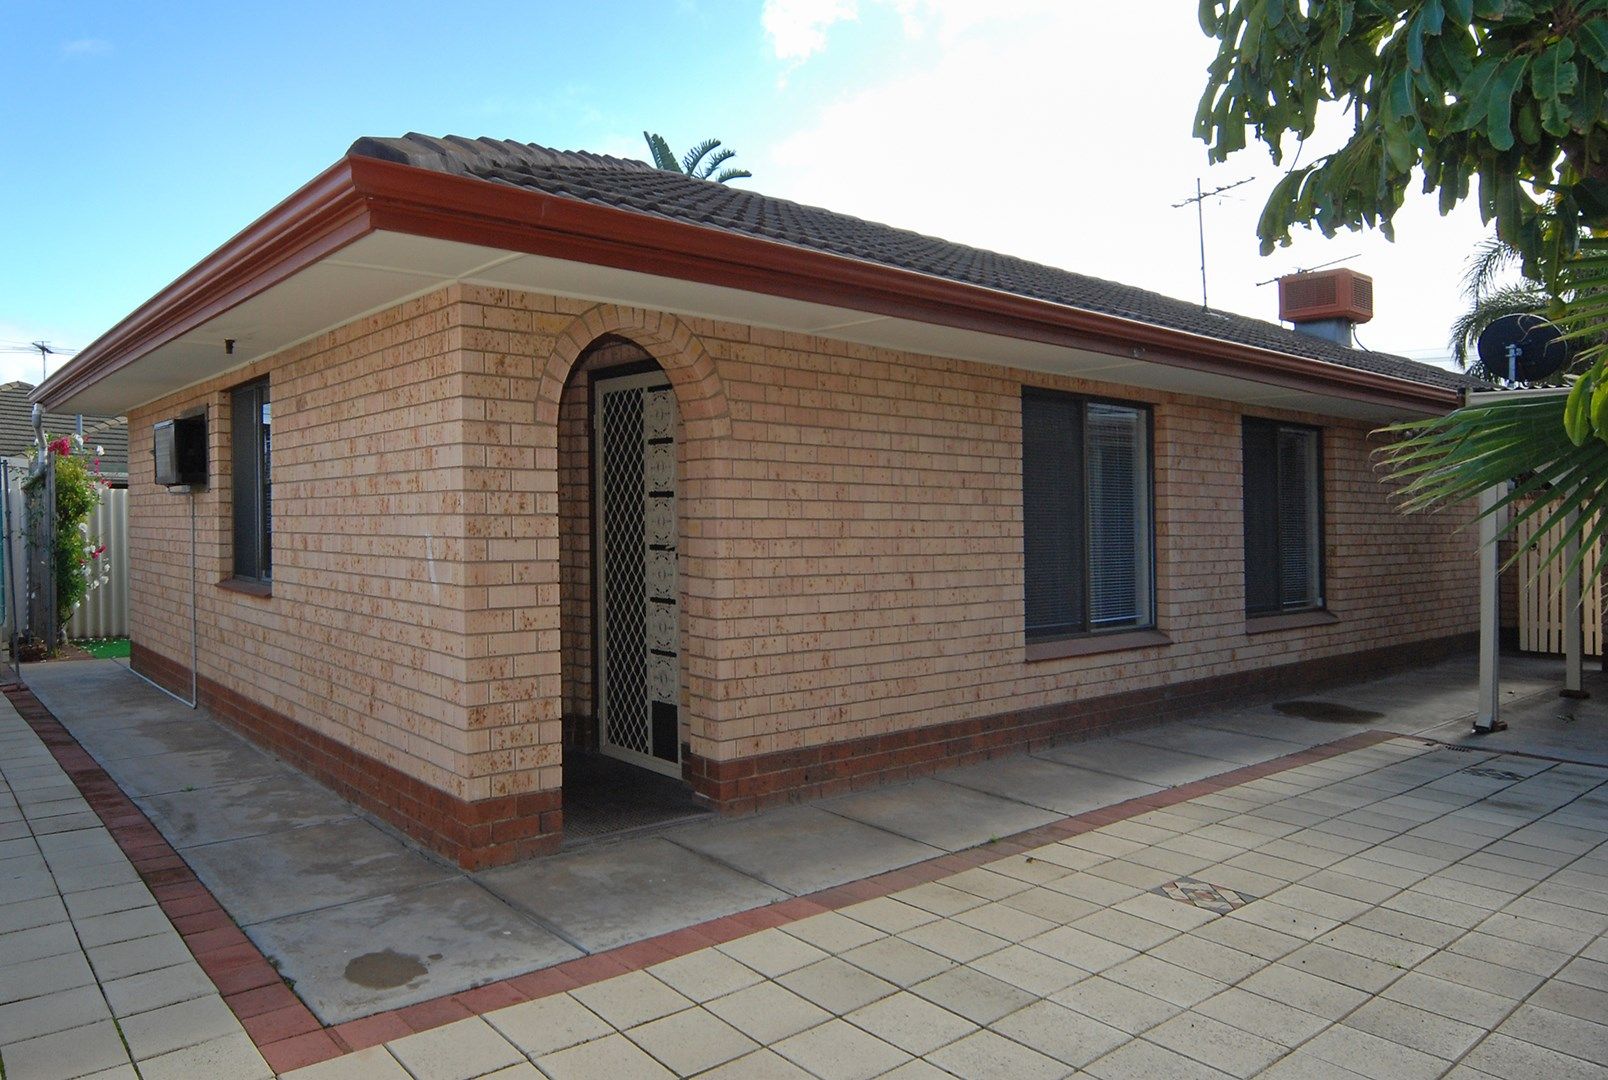 2 bedrooms Apartment / Unit / Flat in 2-54 Exmouth Road GLANVILLE SA, 5015